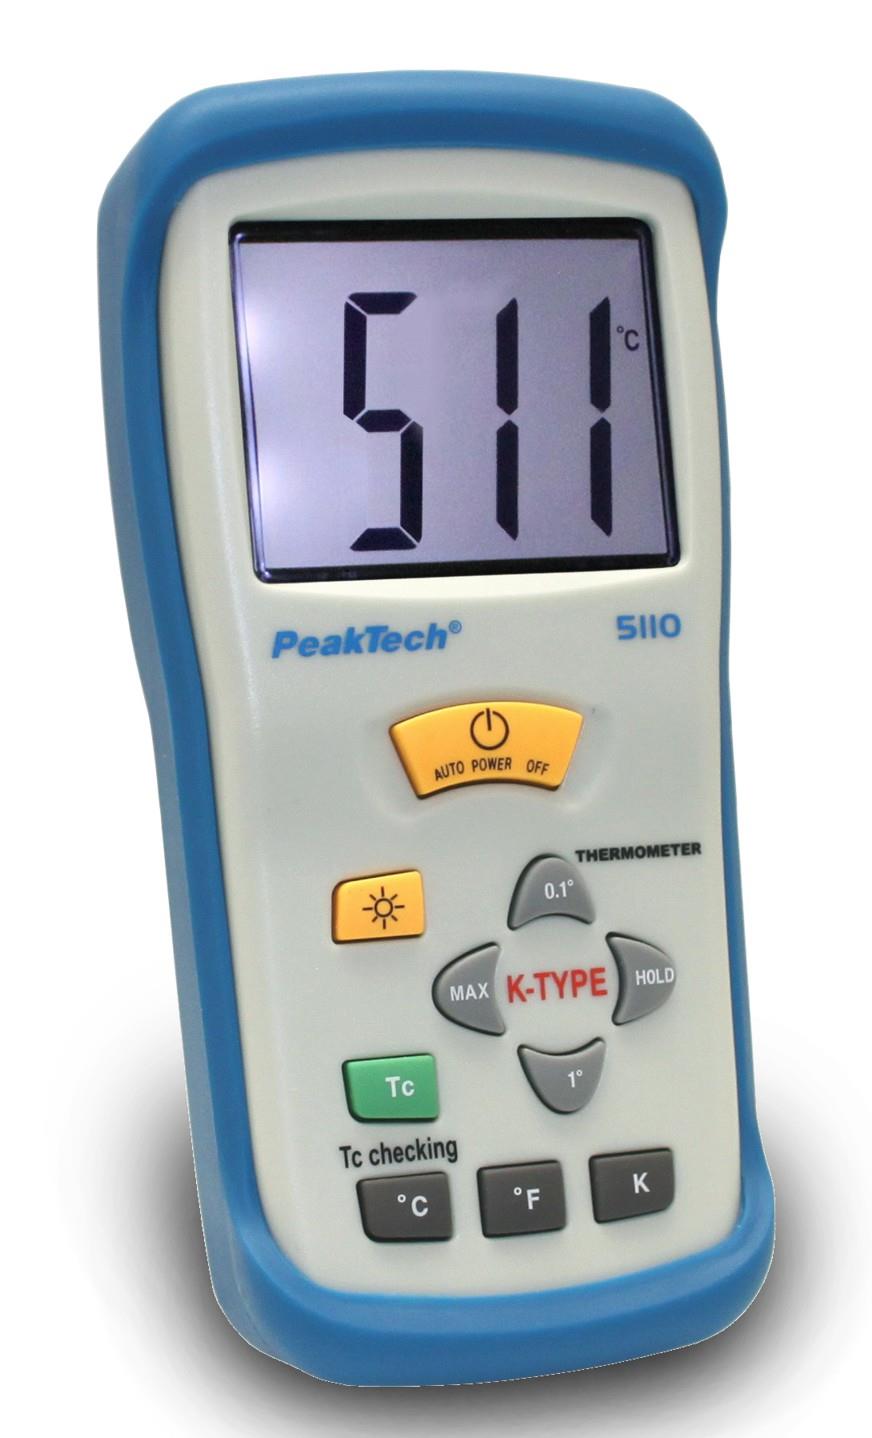 Digital-Thermometer PeakTech® 5110